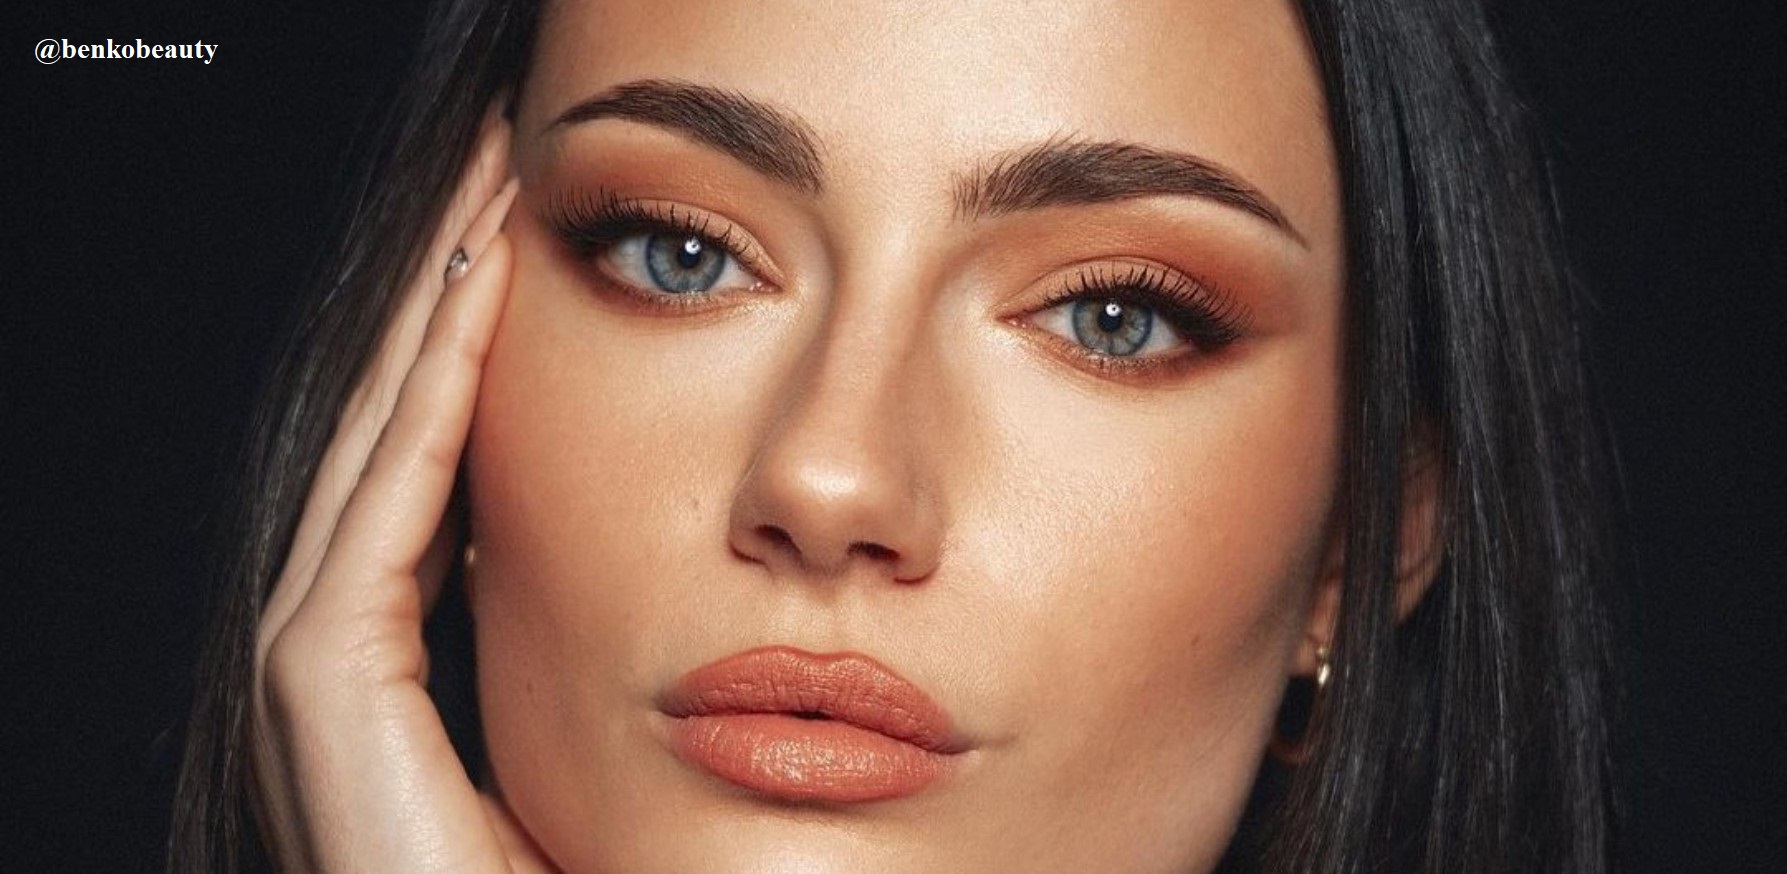 Blend In These Beautiful Eyeshadow Colors If You Are Nude Makeup Lover